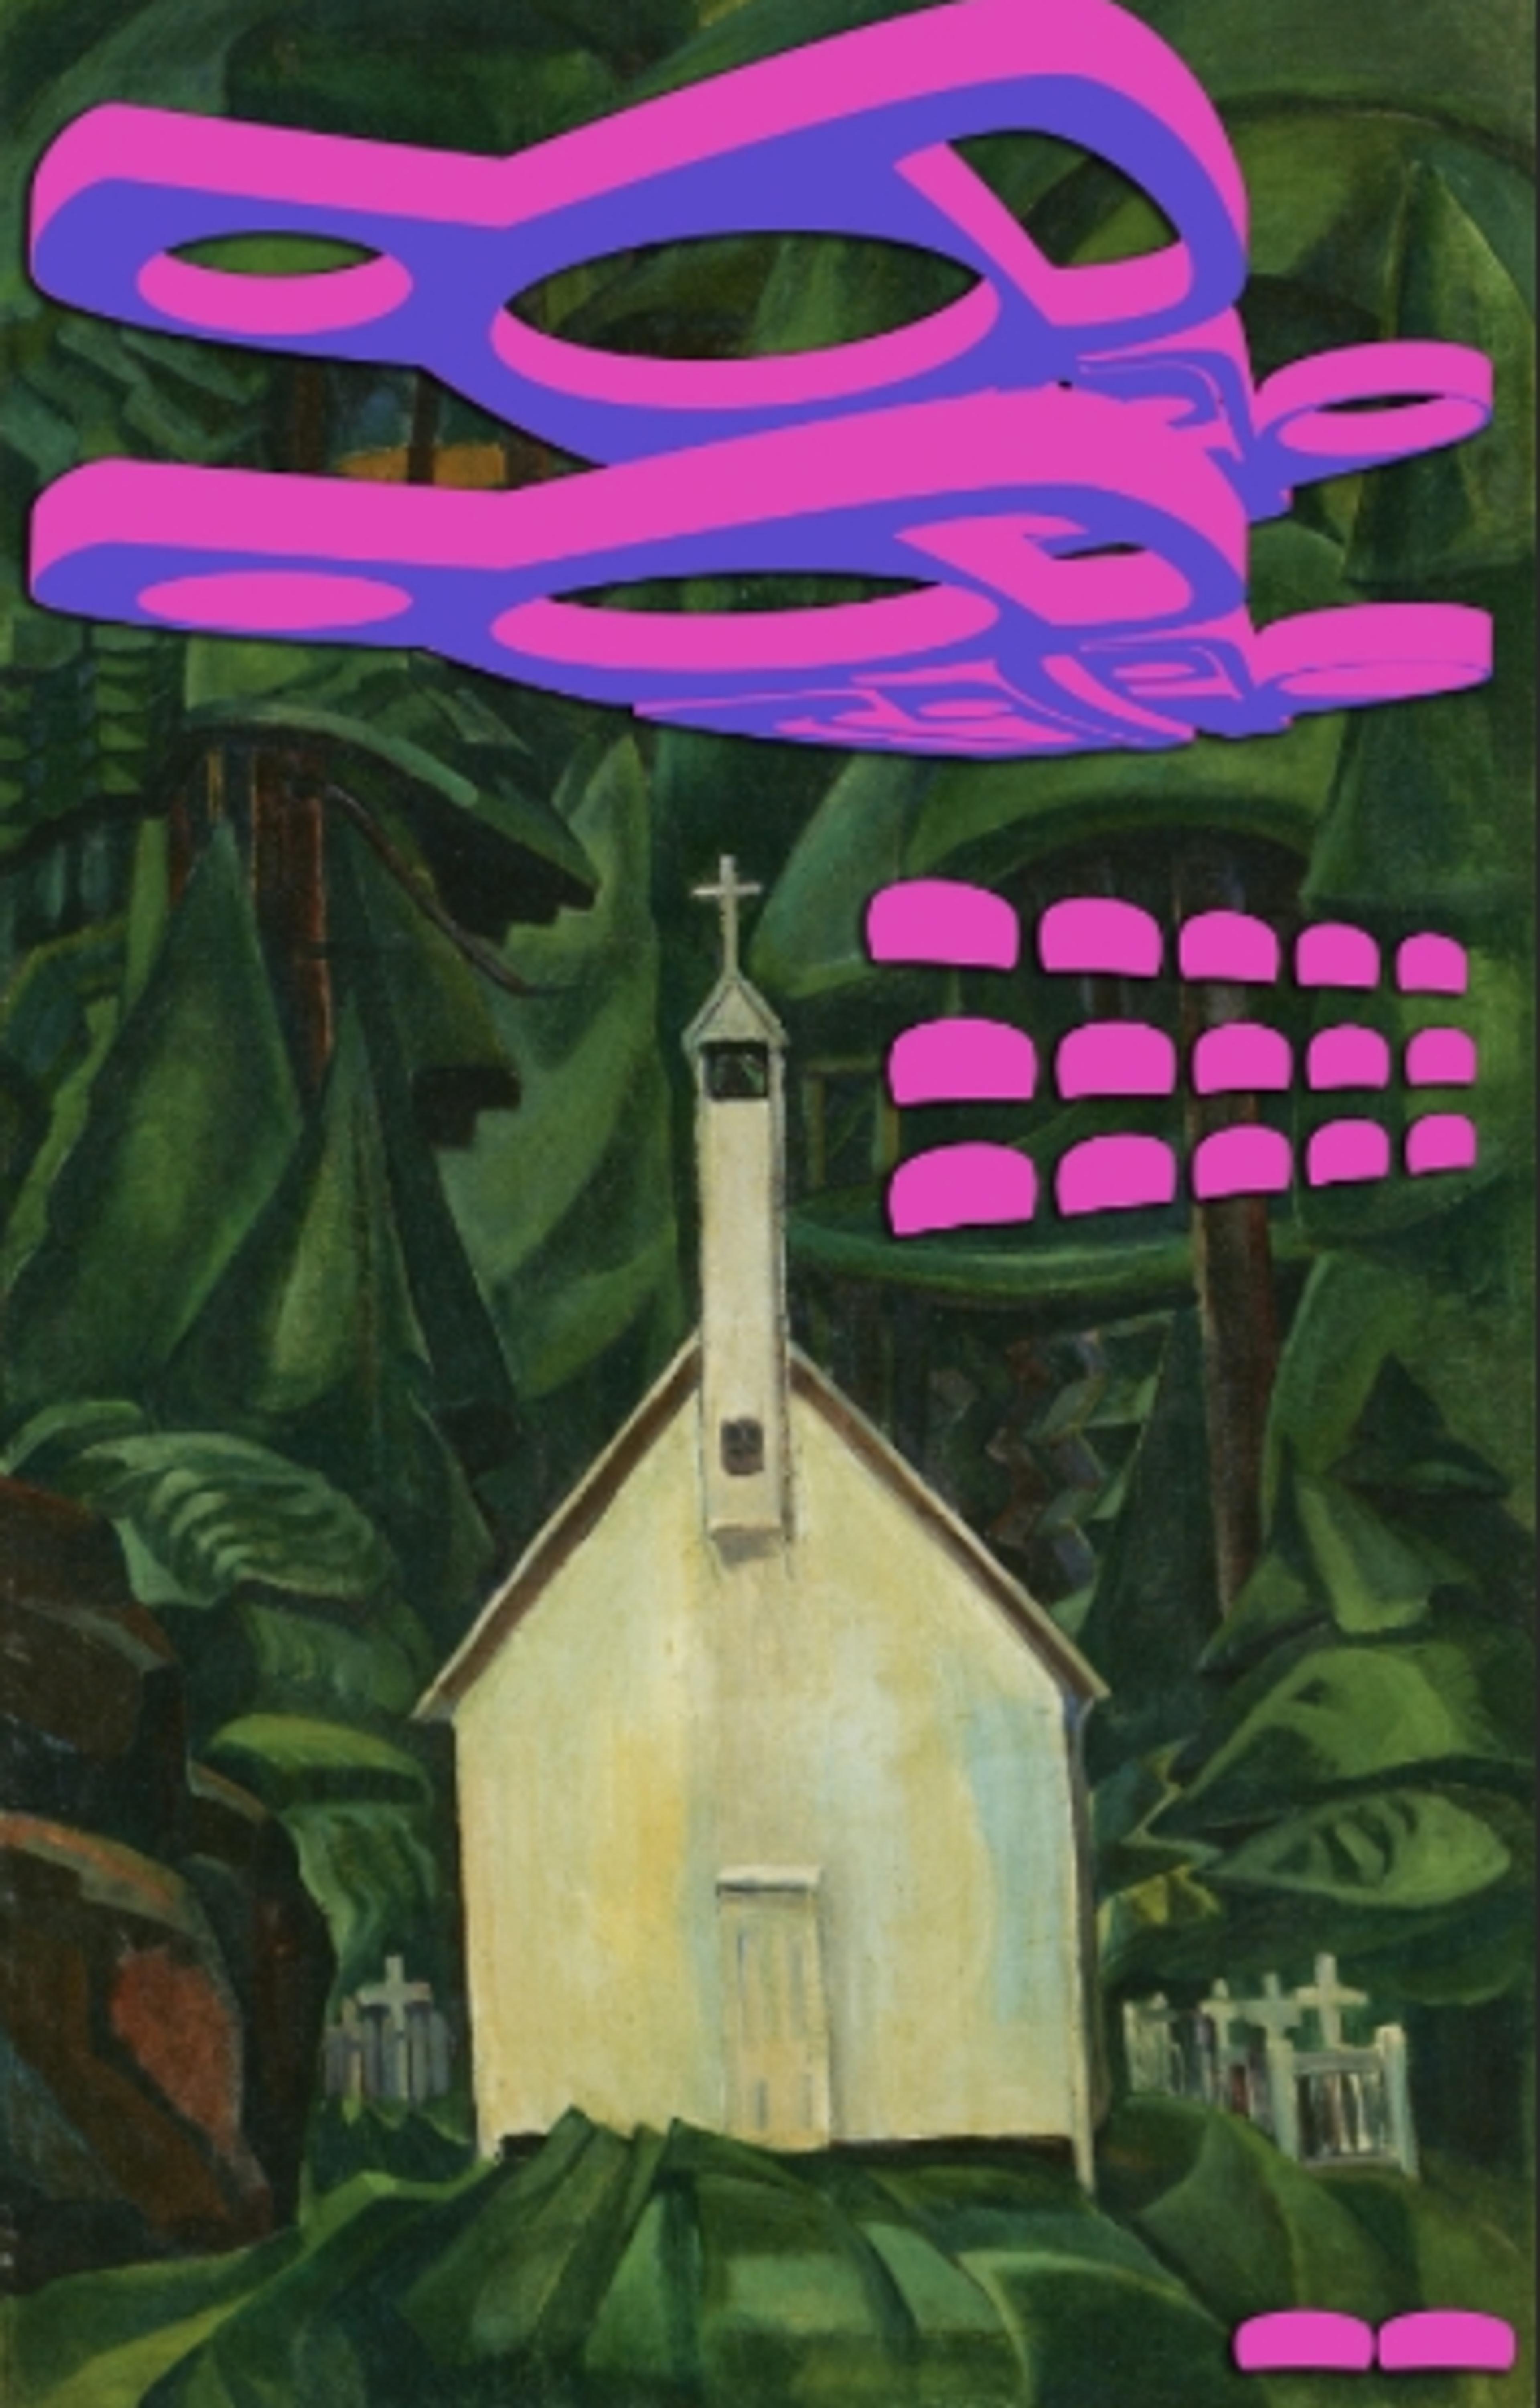 Re-Invaders: Digital Intervention on an Emily Carr Painting